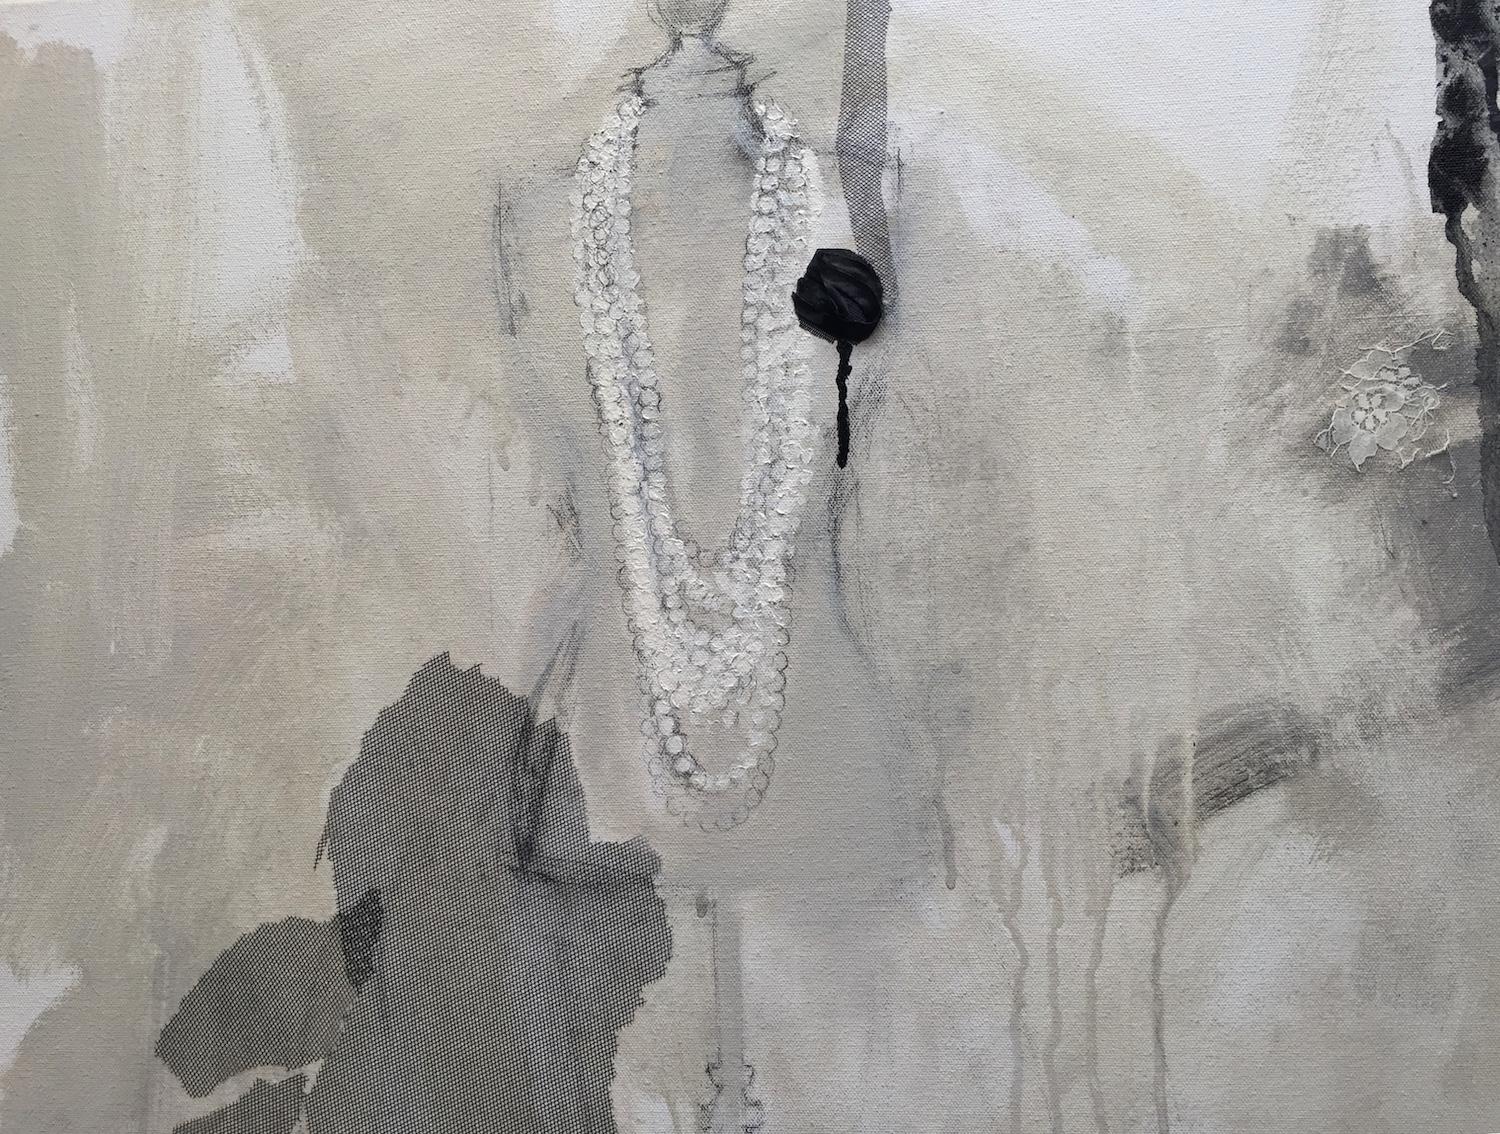 Wear them everywhere all the time. Pearls are featured in this expressive interplay of paint, pencil and textile collage. The combination of intricate detail and intuitive paint strokes, communicates a feminine, ethereal impression, full of texture